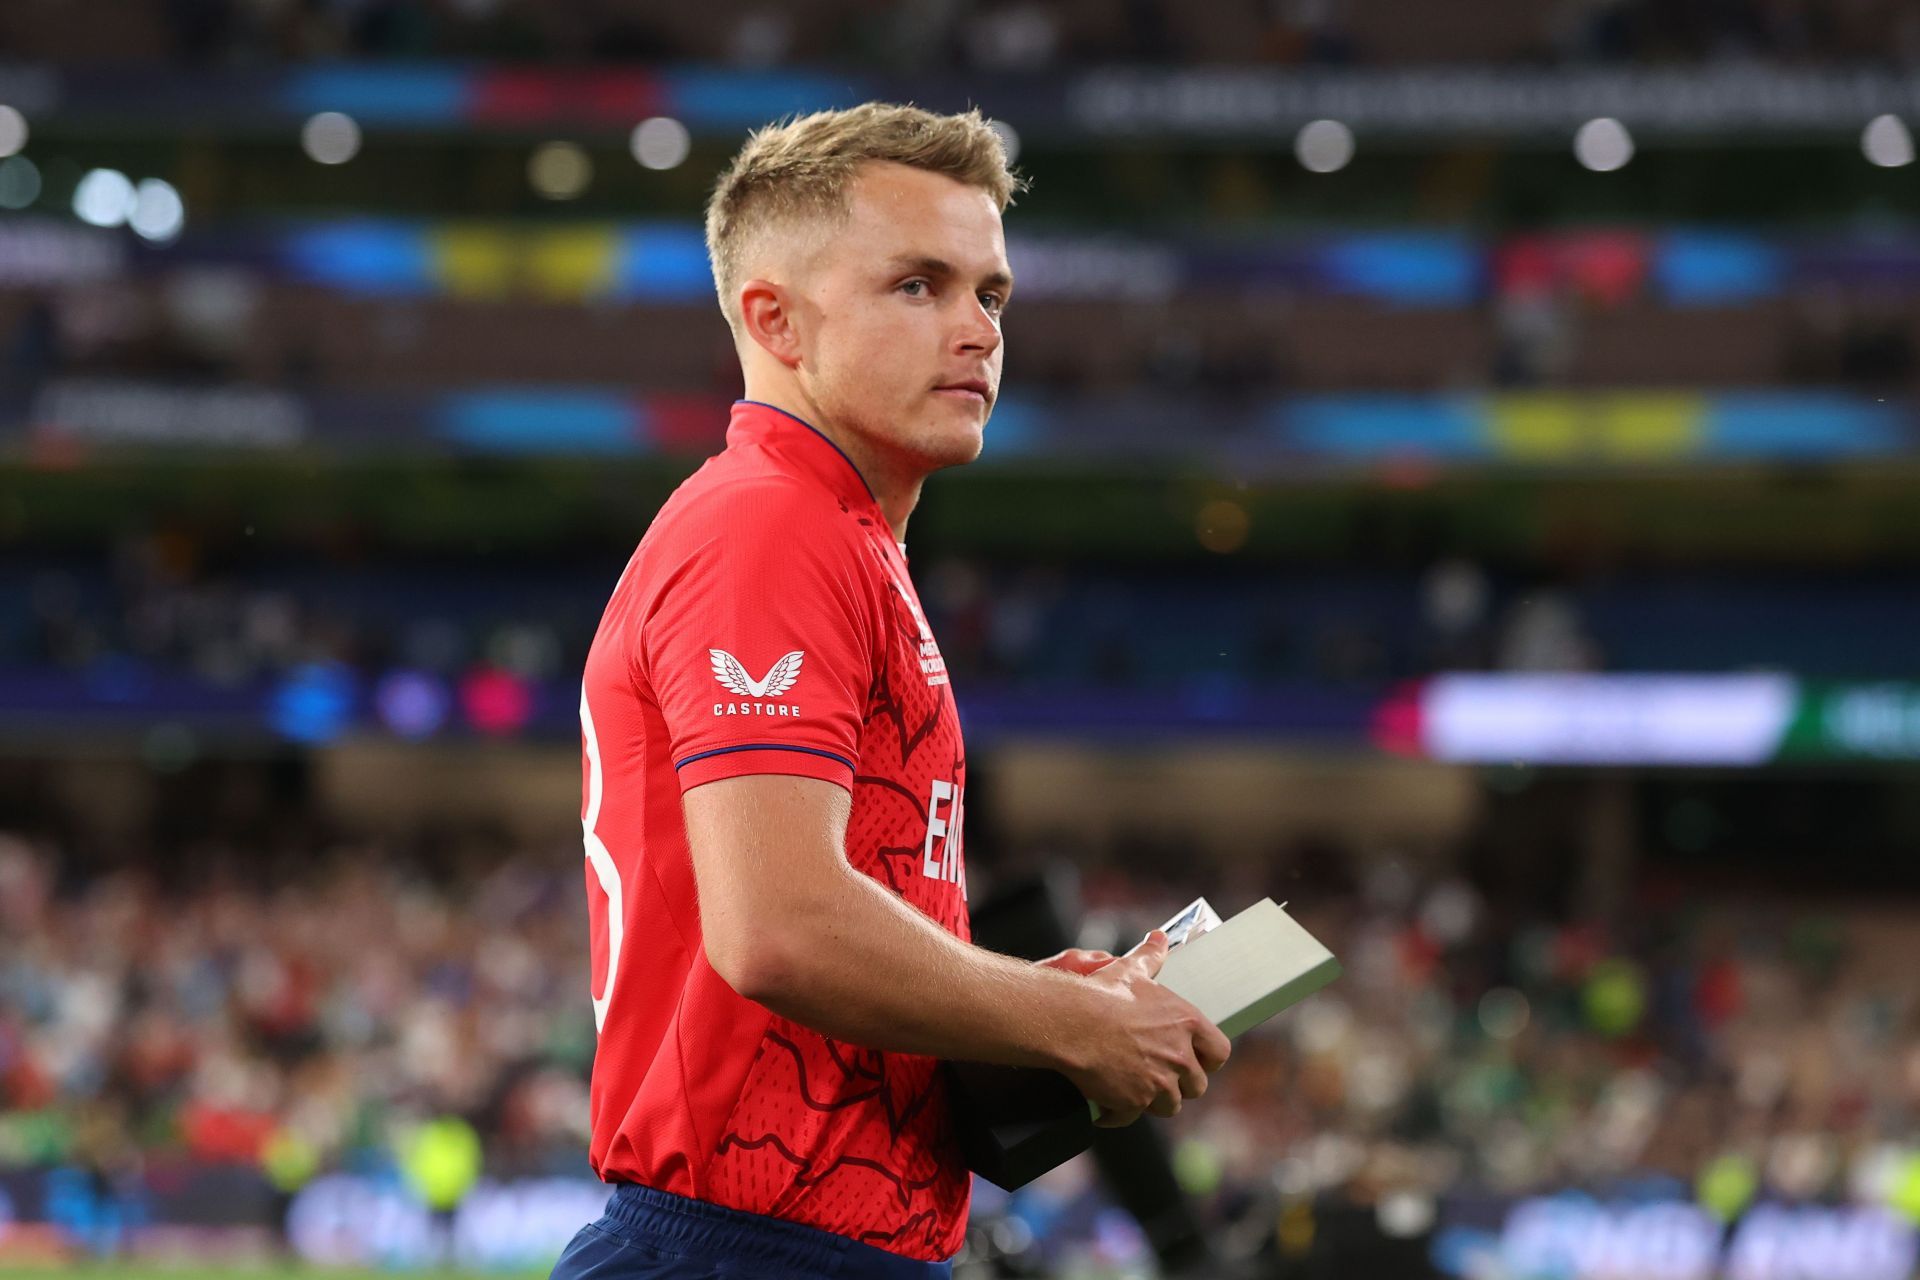 Sam Curran finished as the second highest wicket-taker in the T20 World Cup 2022 (Image: Getty)